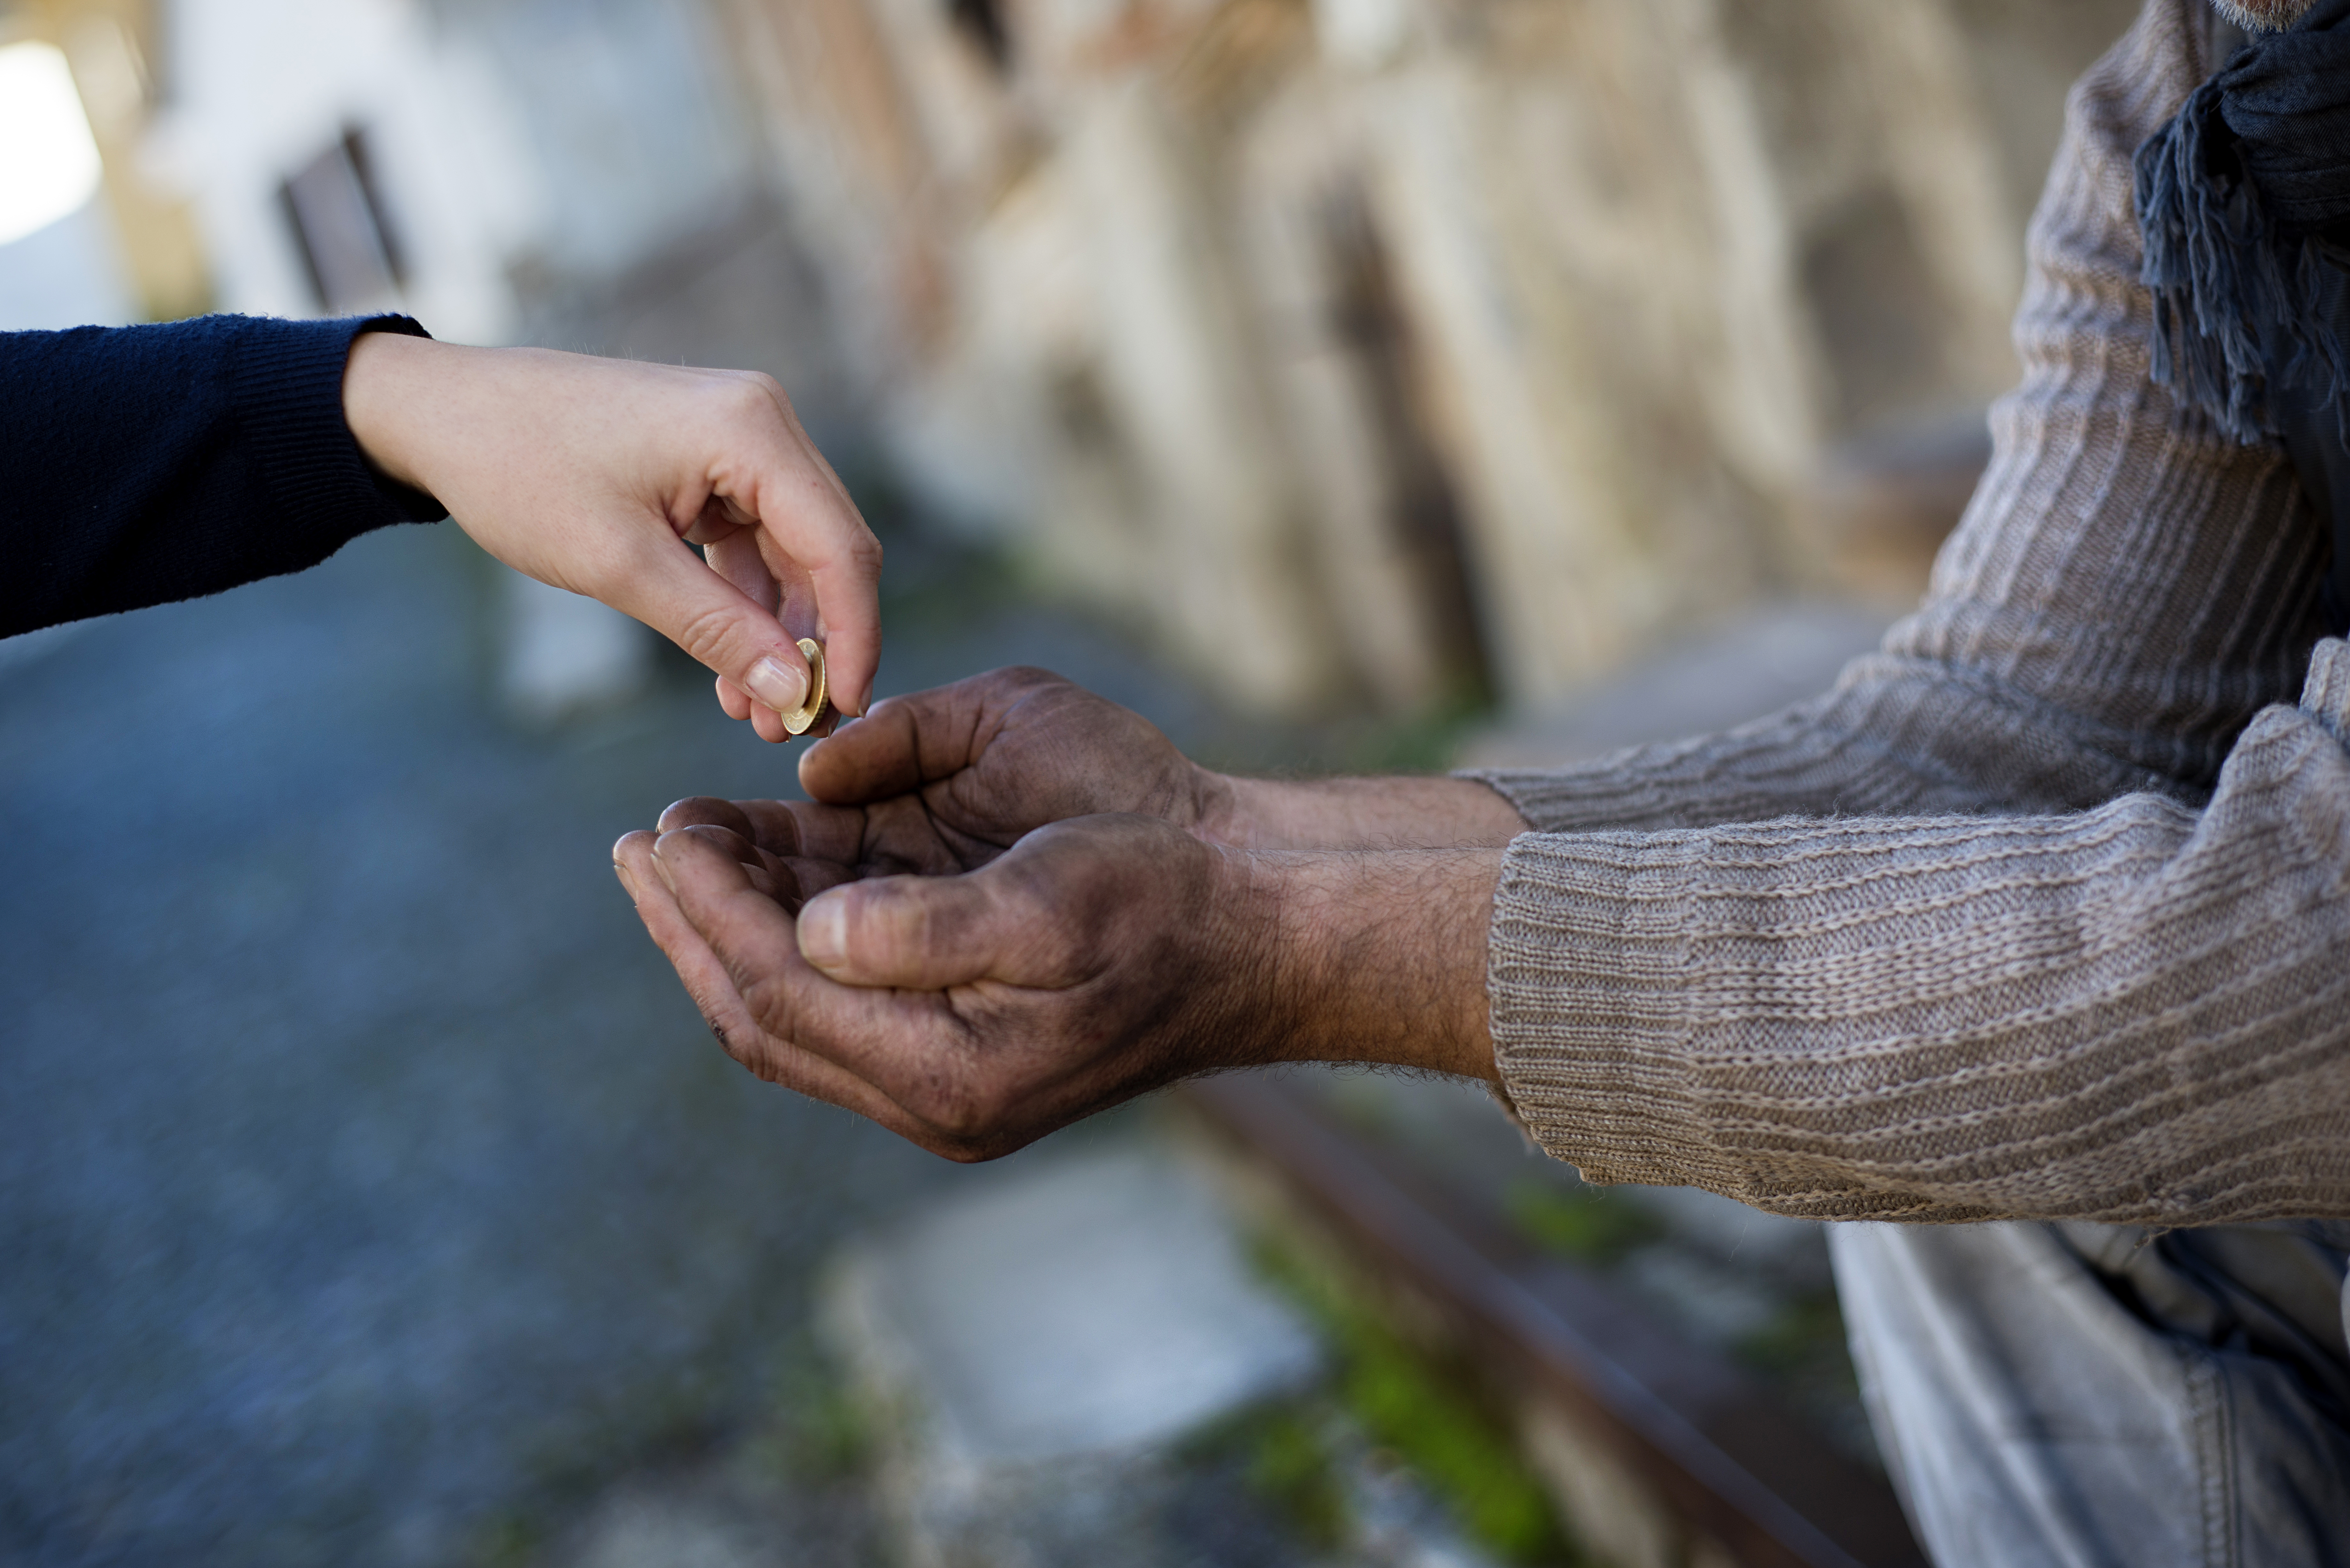 Someone giving change to a homeless person. | Source: Shutterstock